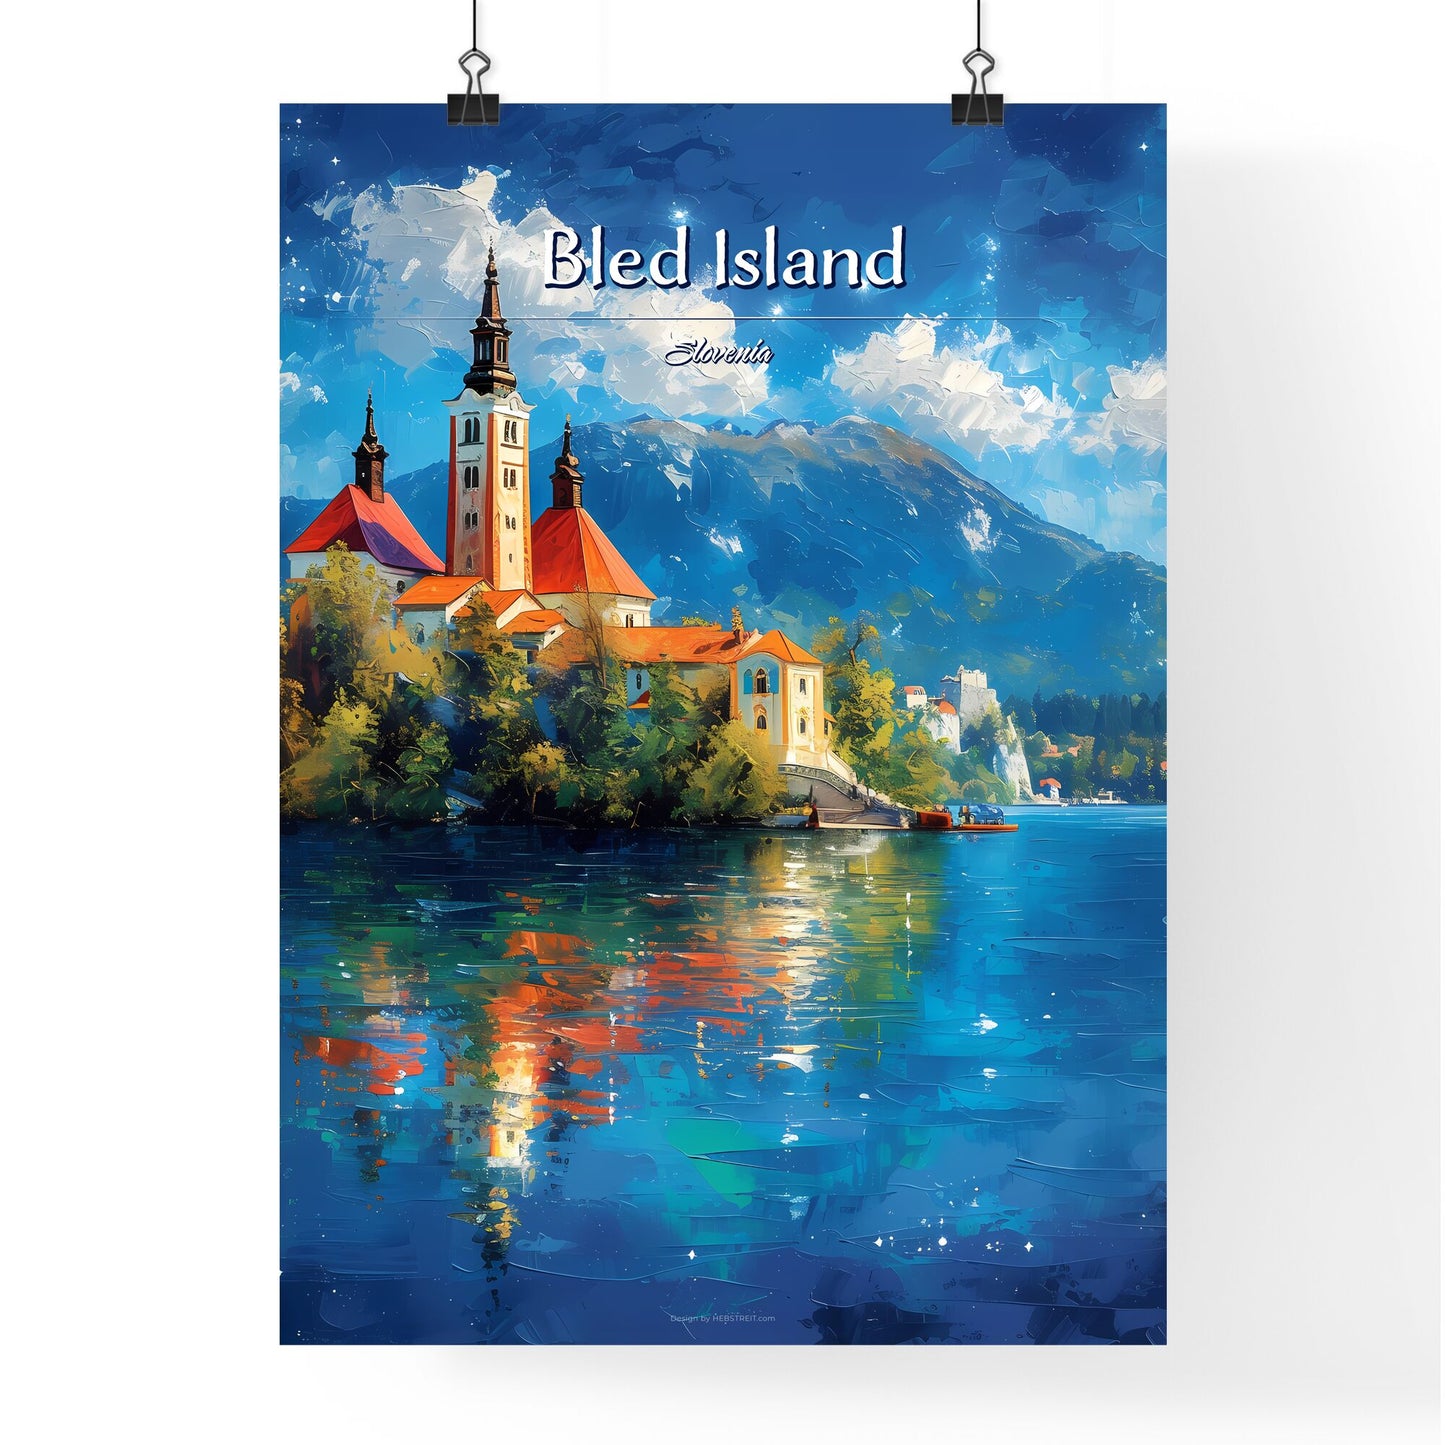 Bled Island, Slovenia - Art print of a building on a island with trees and mountains in the background Default Title